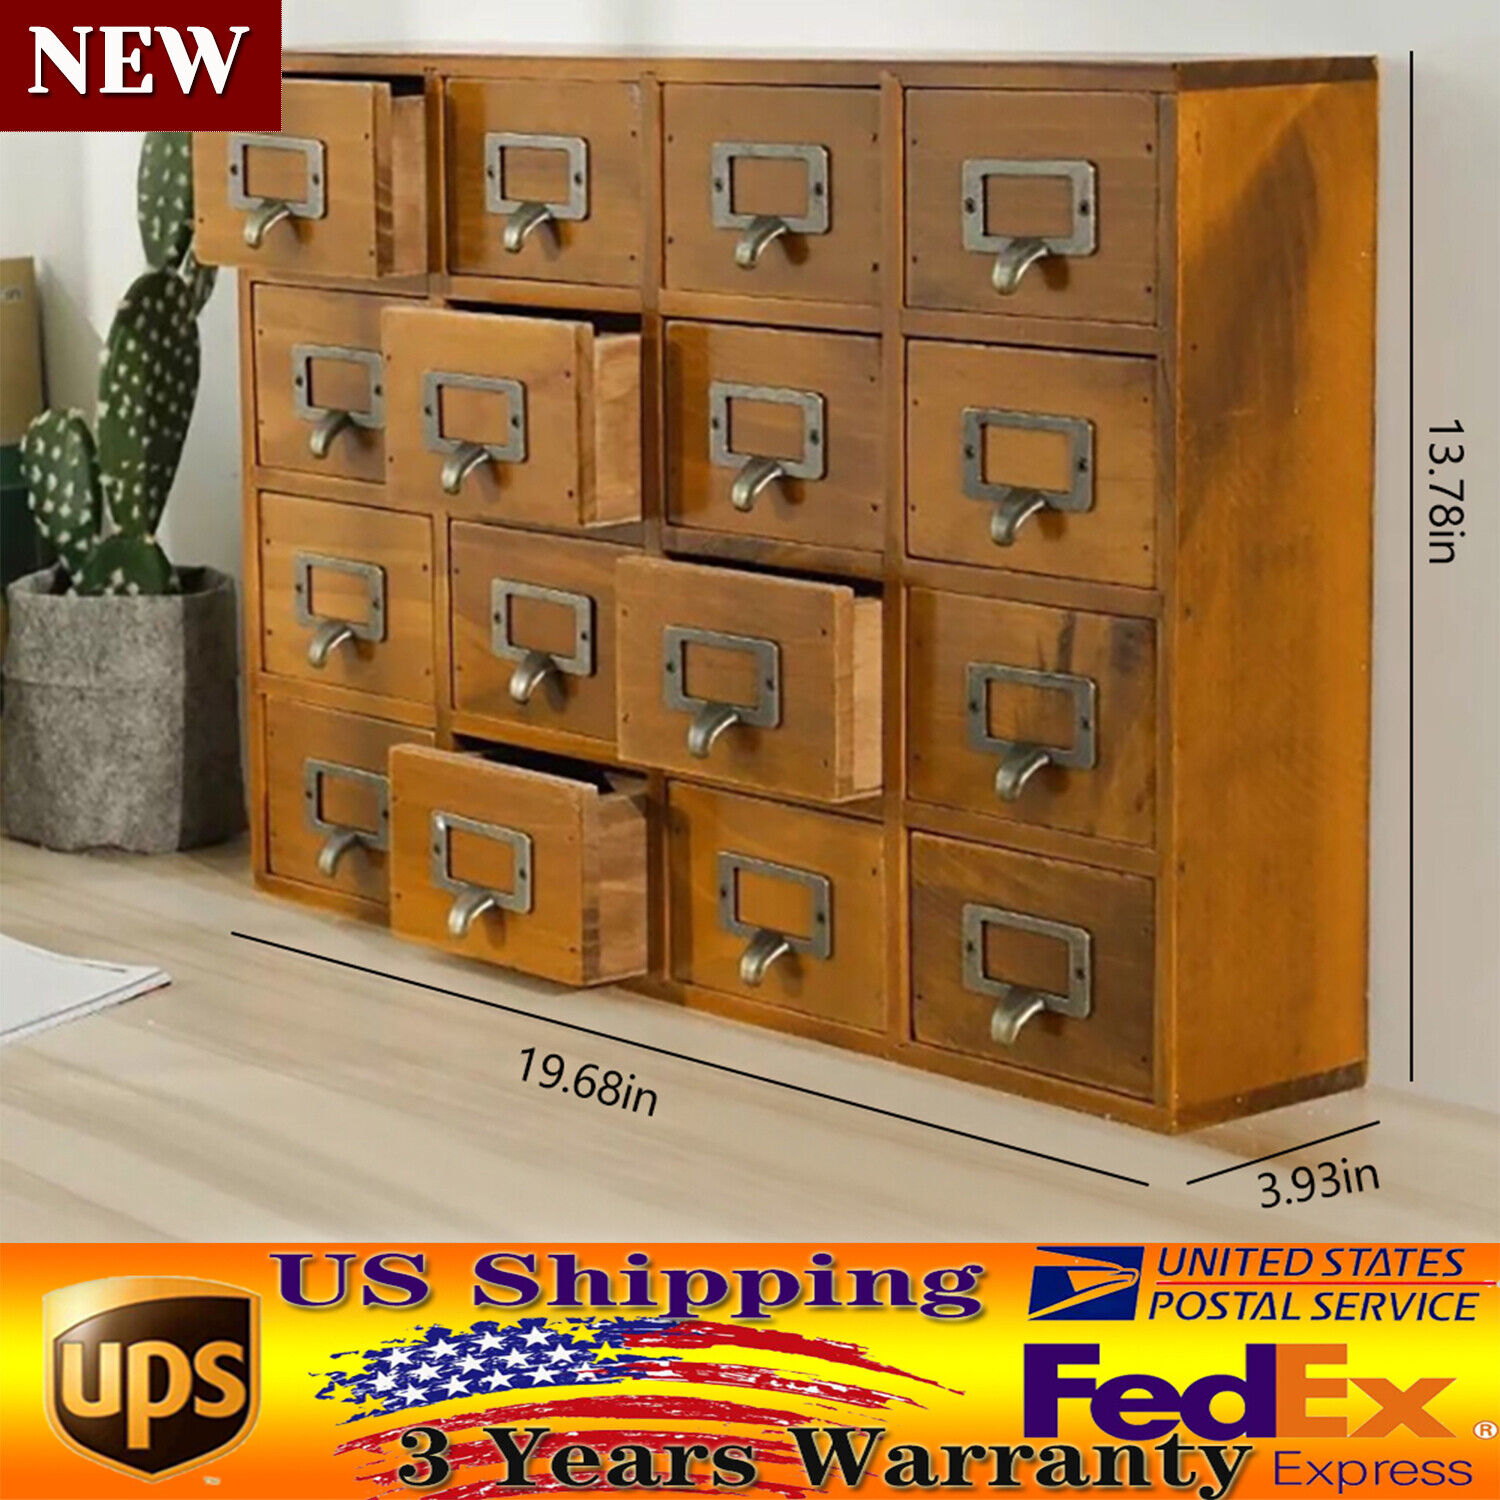 16 Drawers Wooden Desk Drawer Organizer Apothecary Craft Cabinet Supplies Rustic